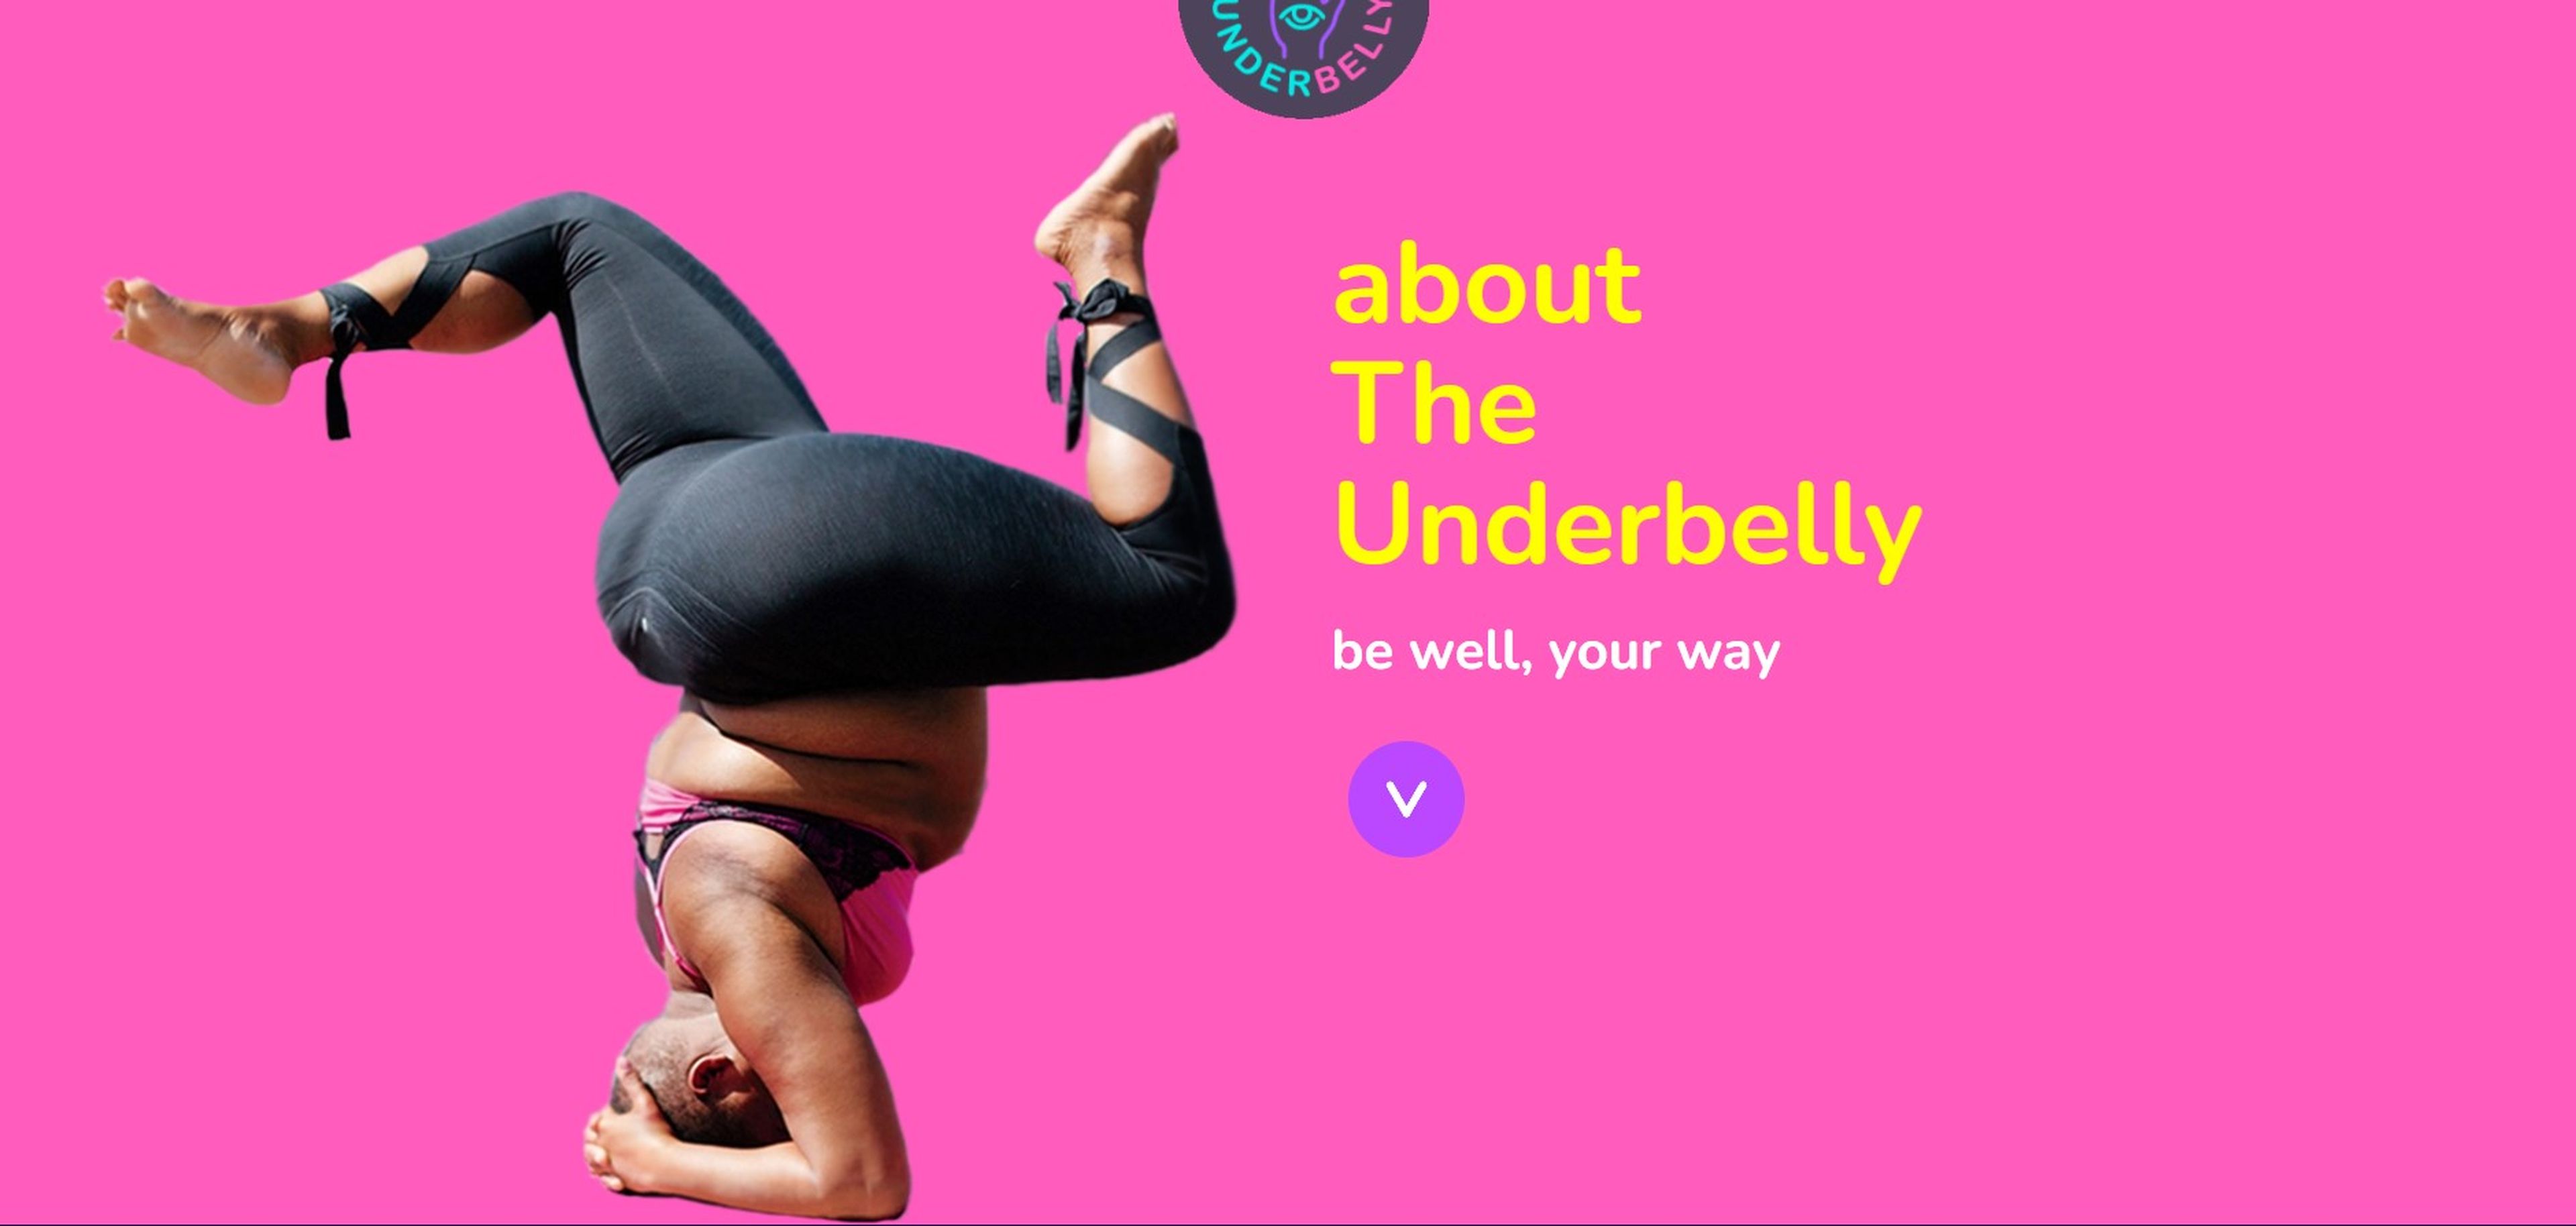 The Underbelly